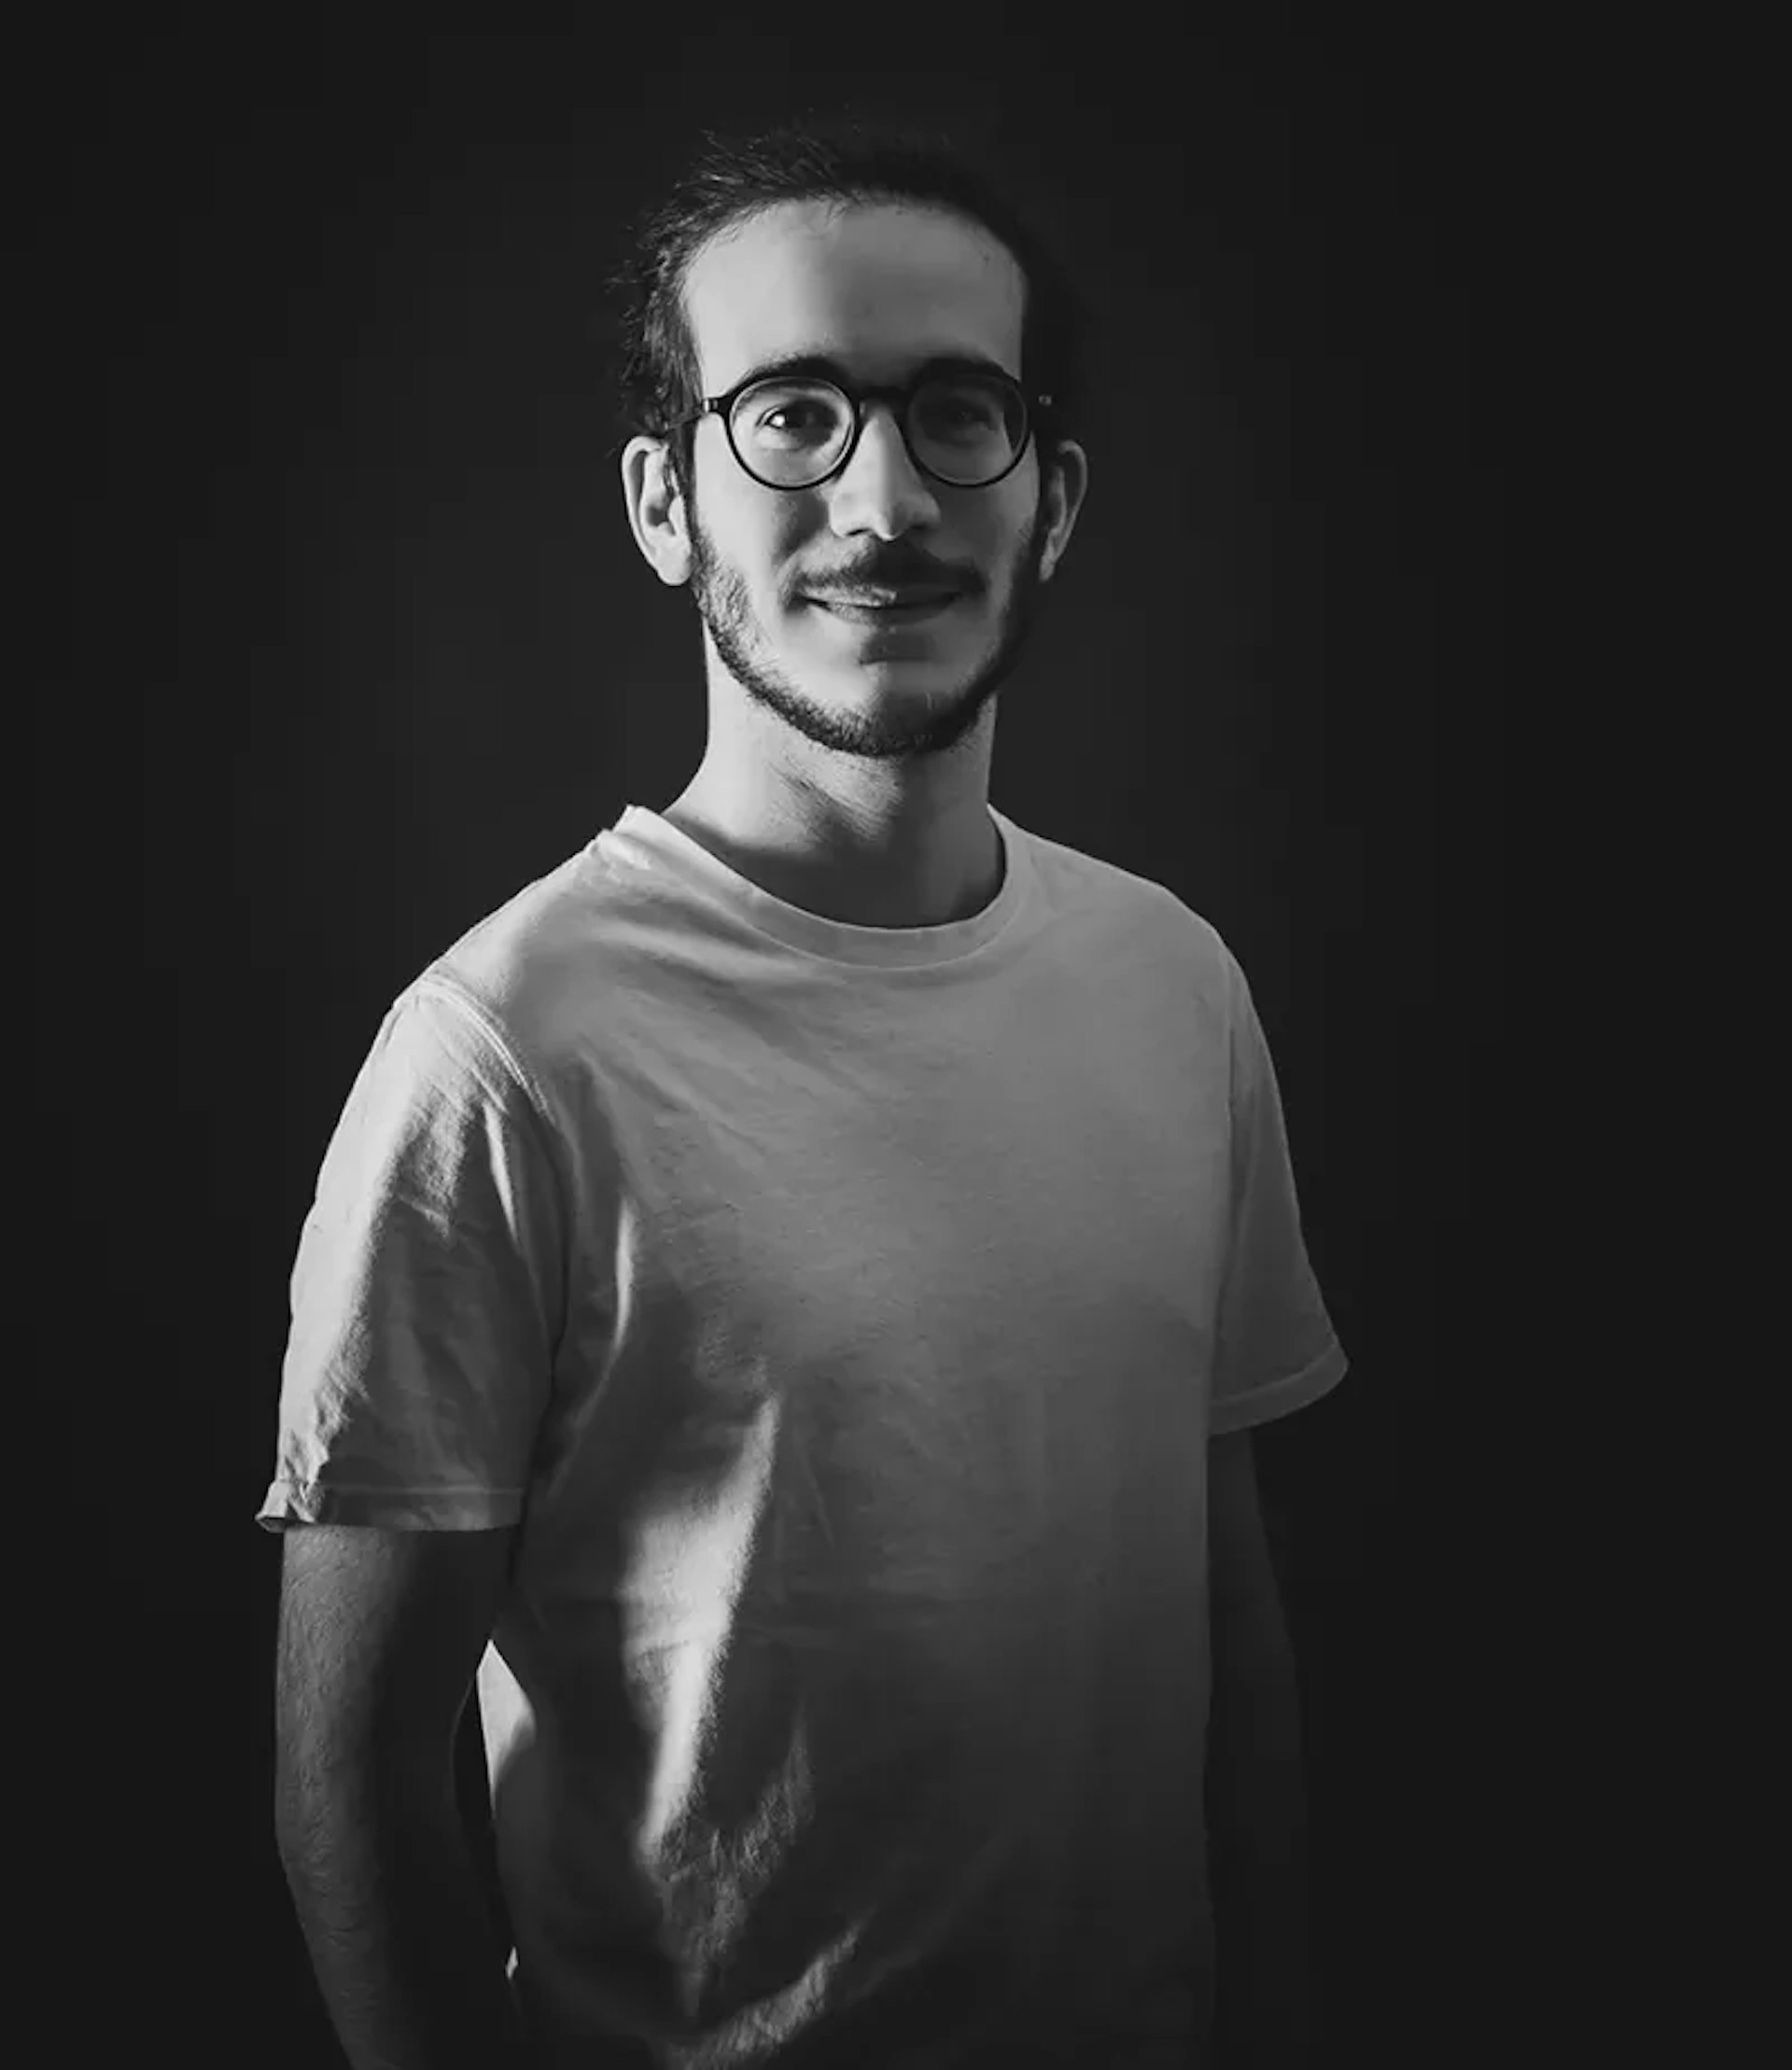 Portrait of Joao Mendes from the Marvelous Digital team, Digital project manager